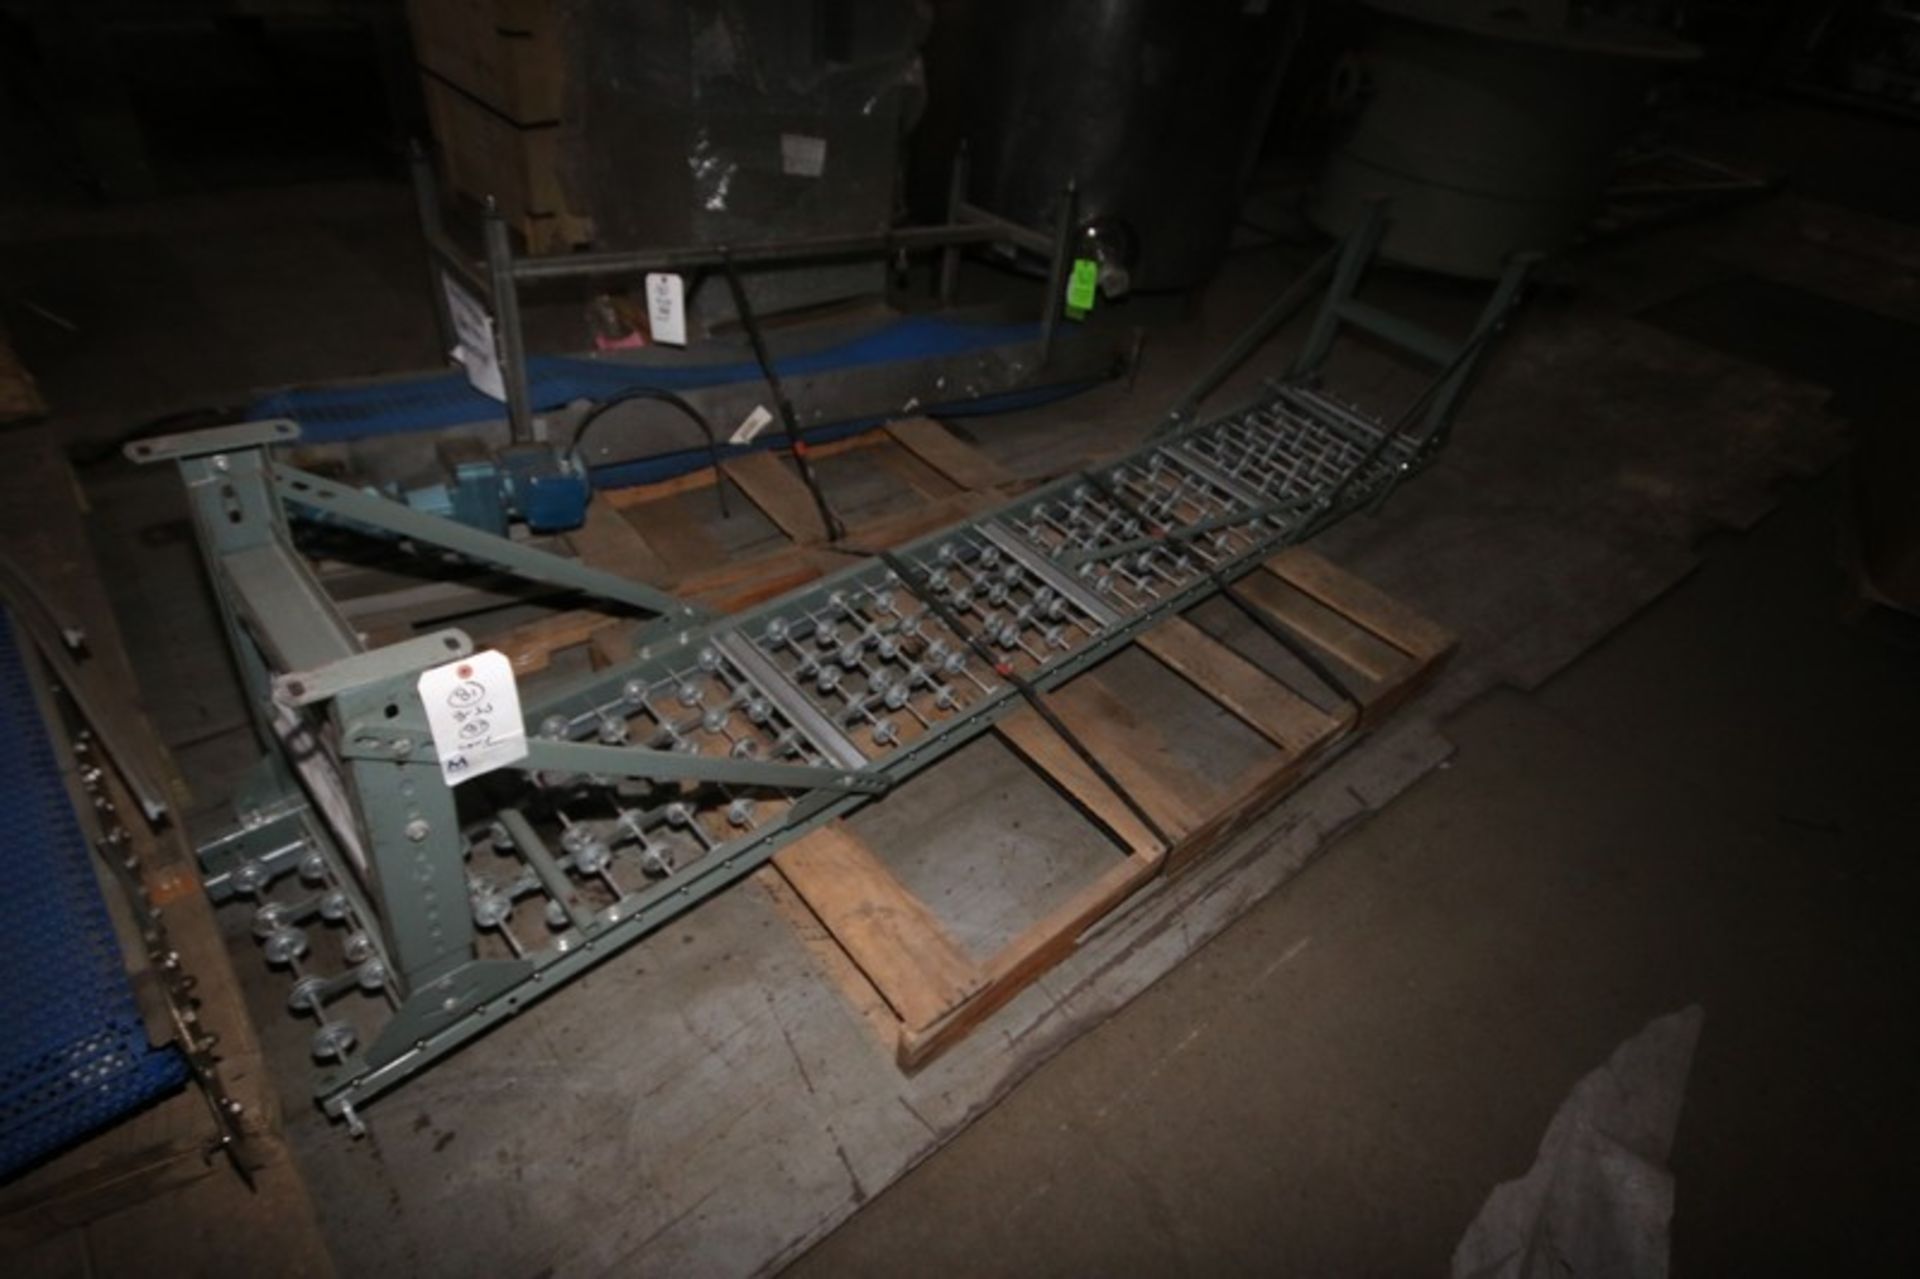 Section of Skate Conveyor, Overall Dims.: Aprox. 9'7" L x 16" W x 24" H